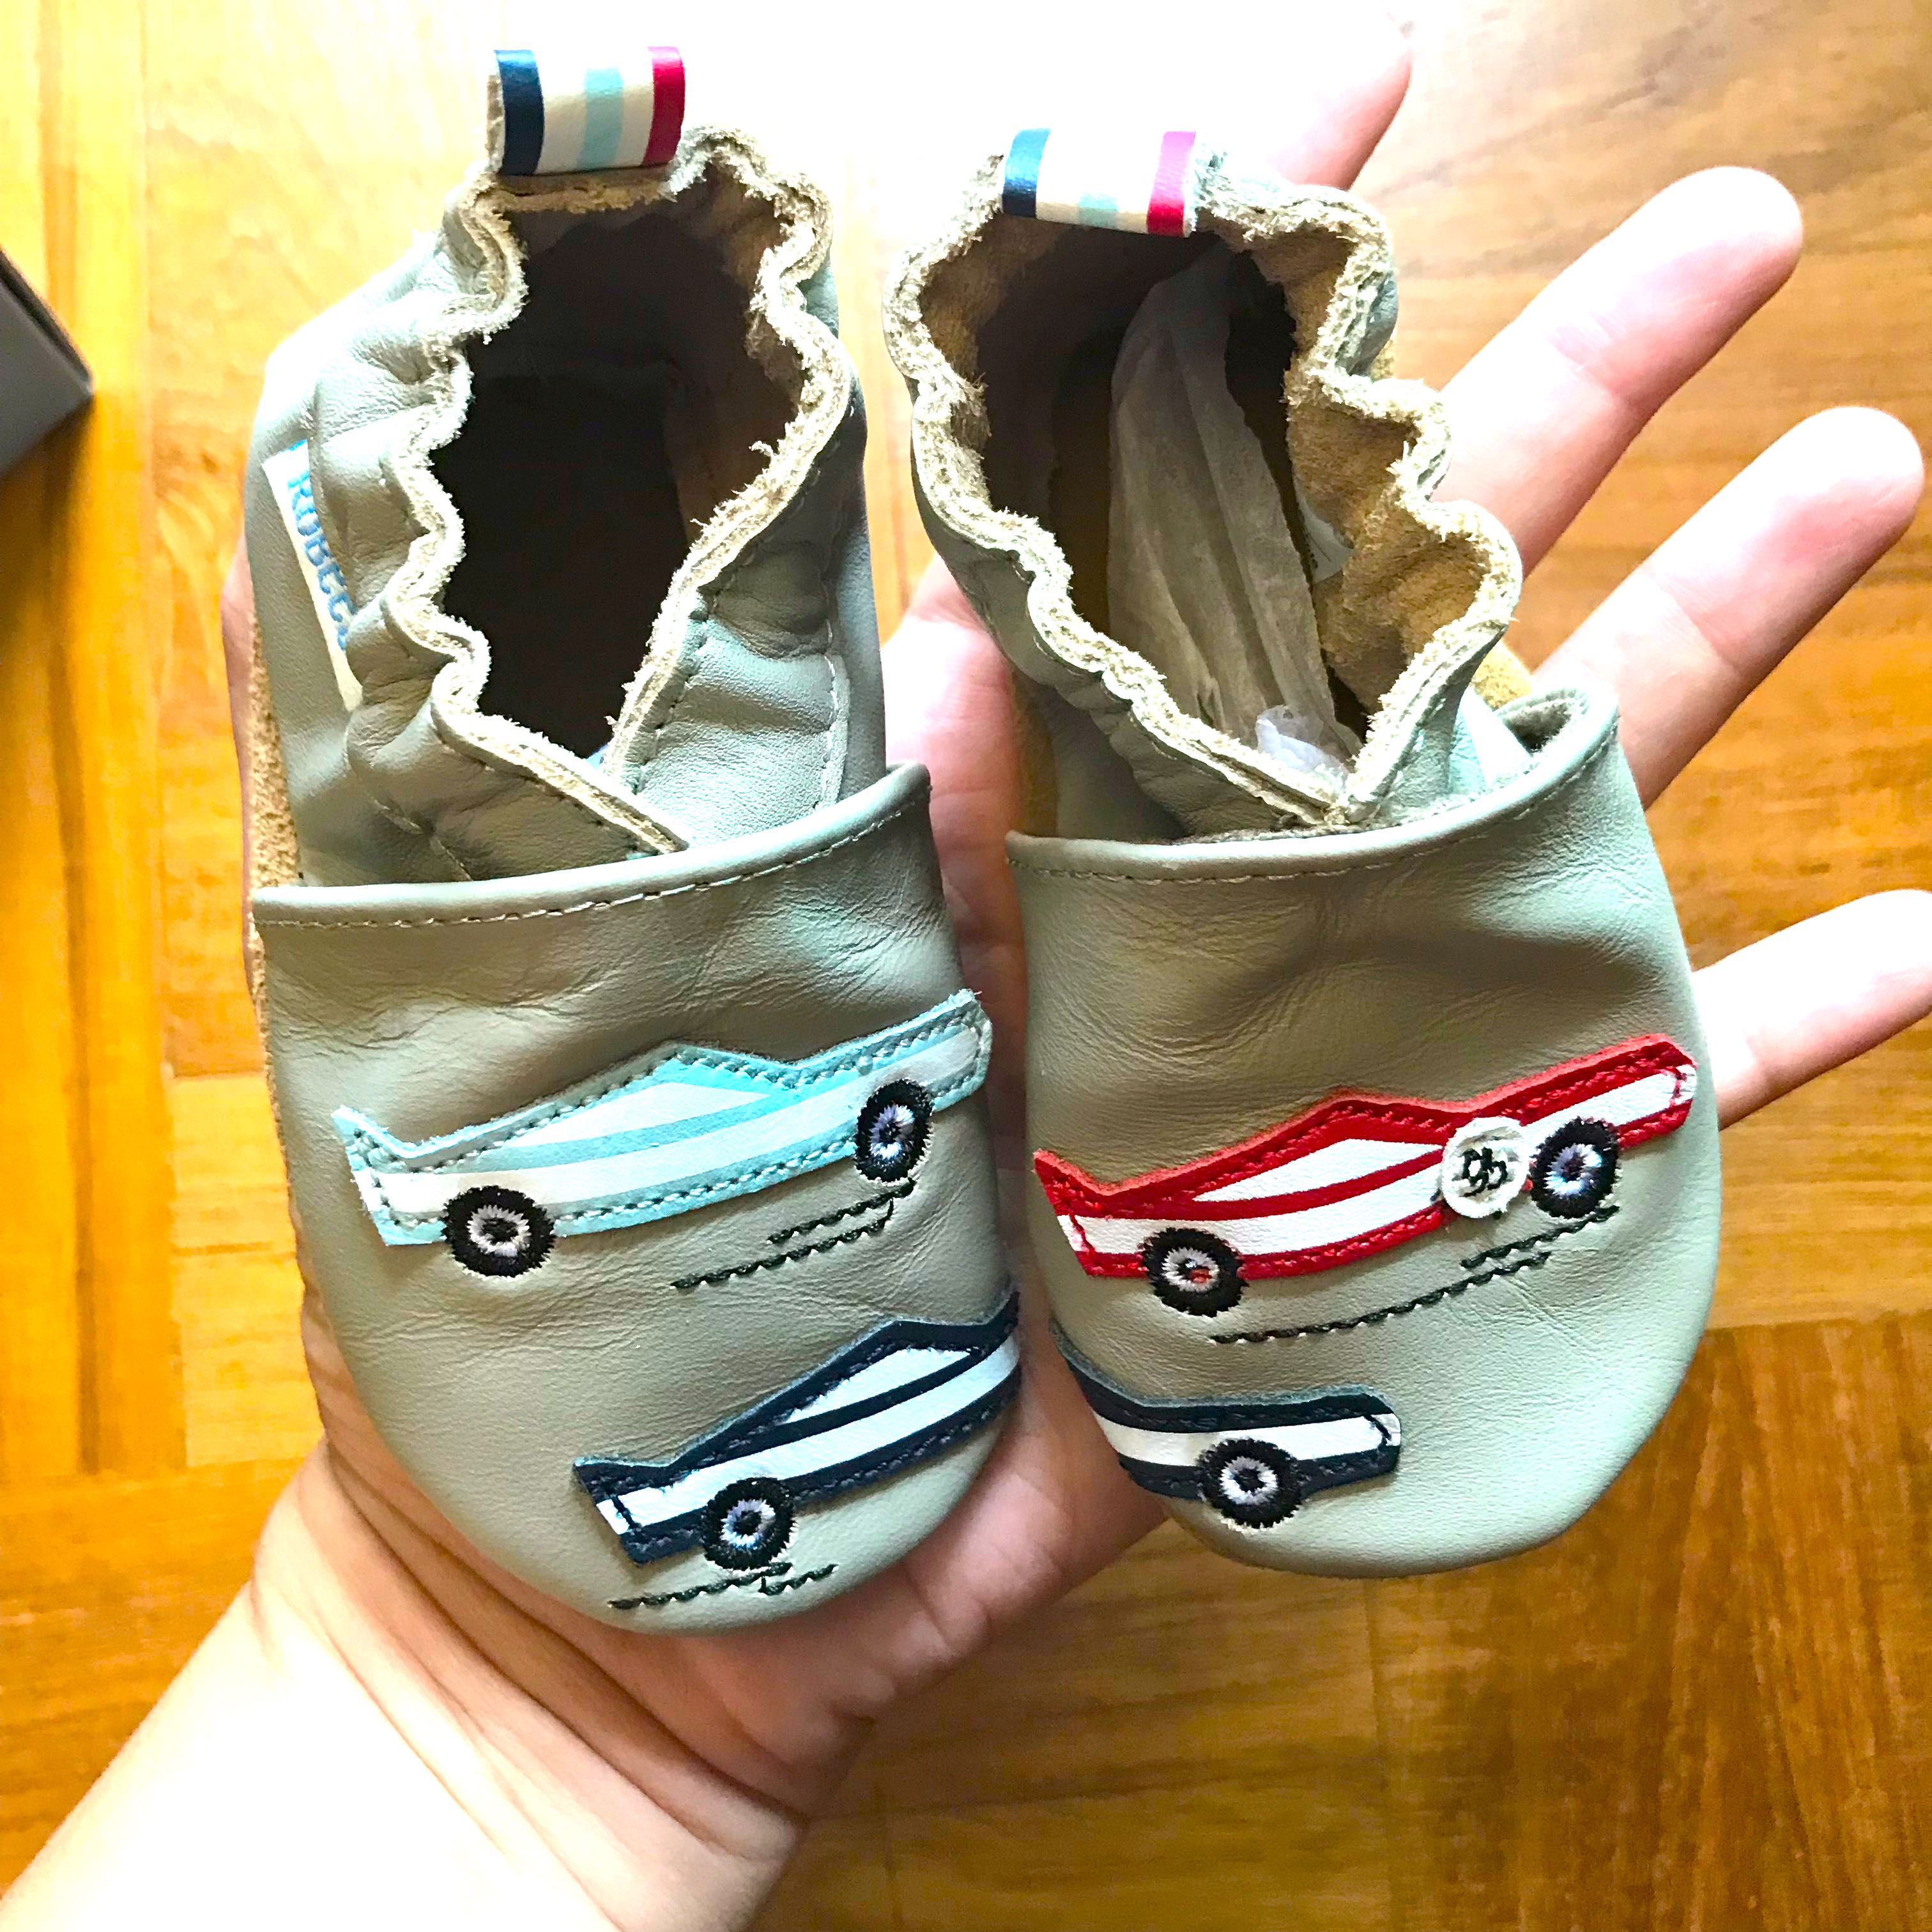 robeez baby boy shoes